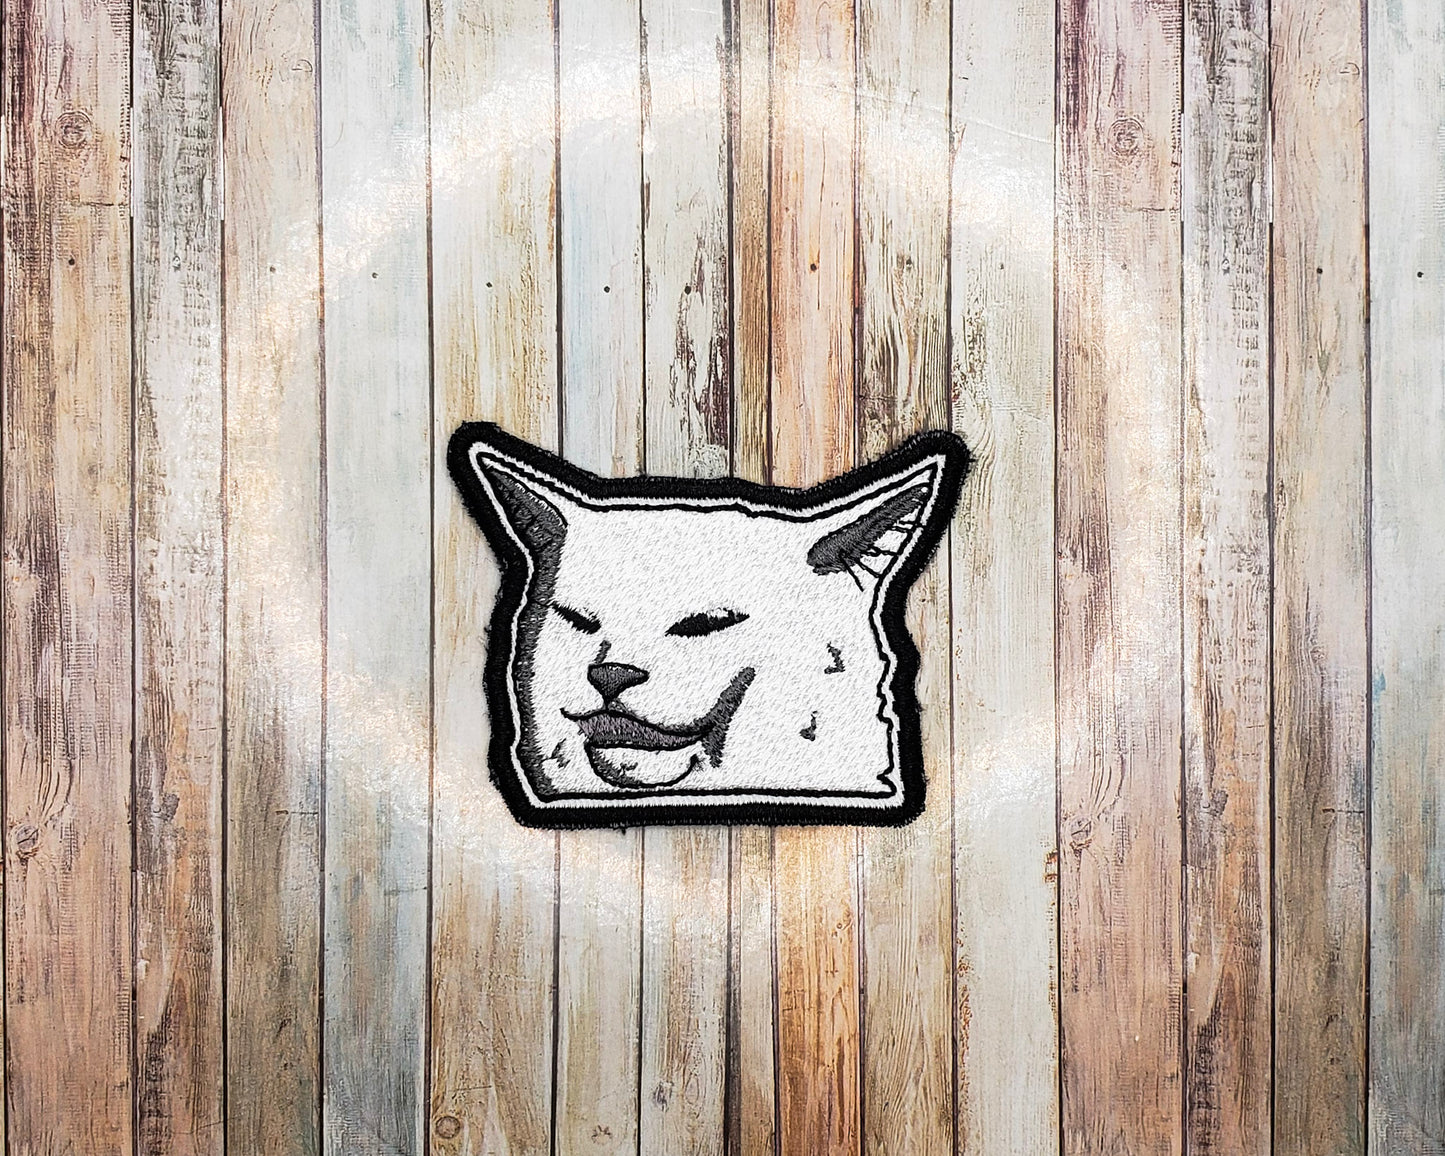 Sarcastic Cat Embroidered Patch